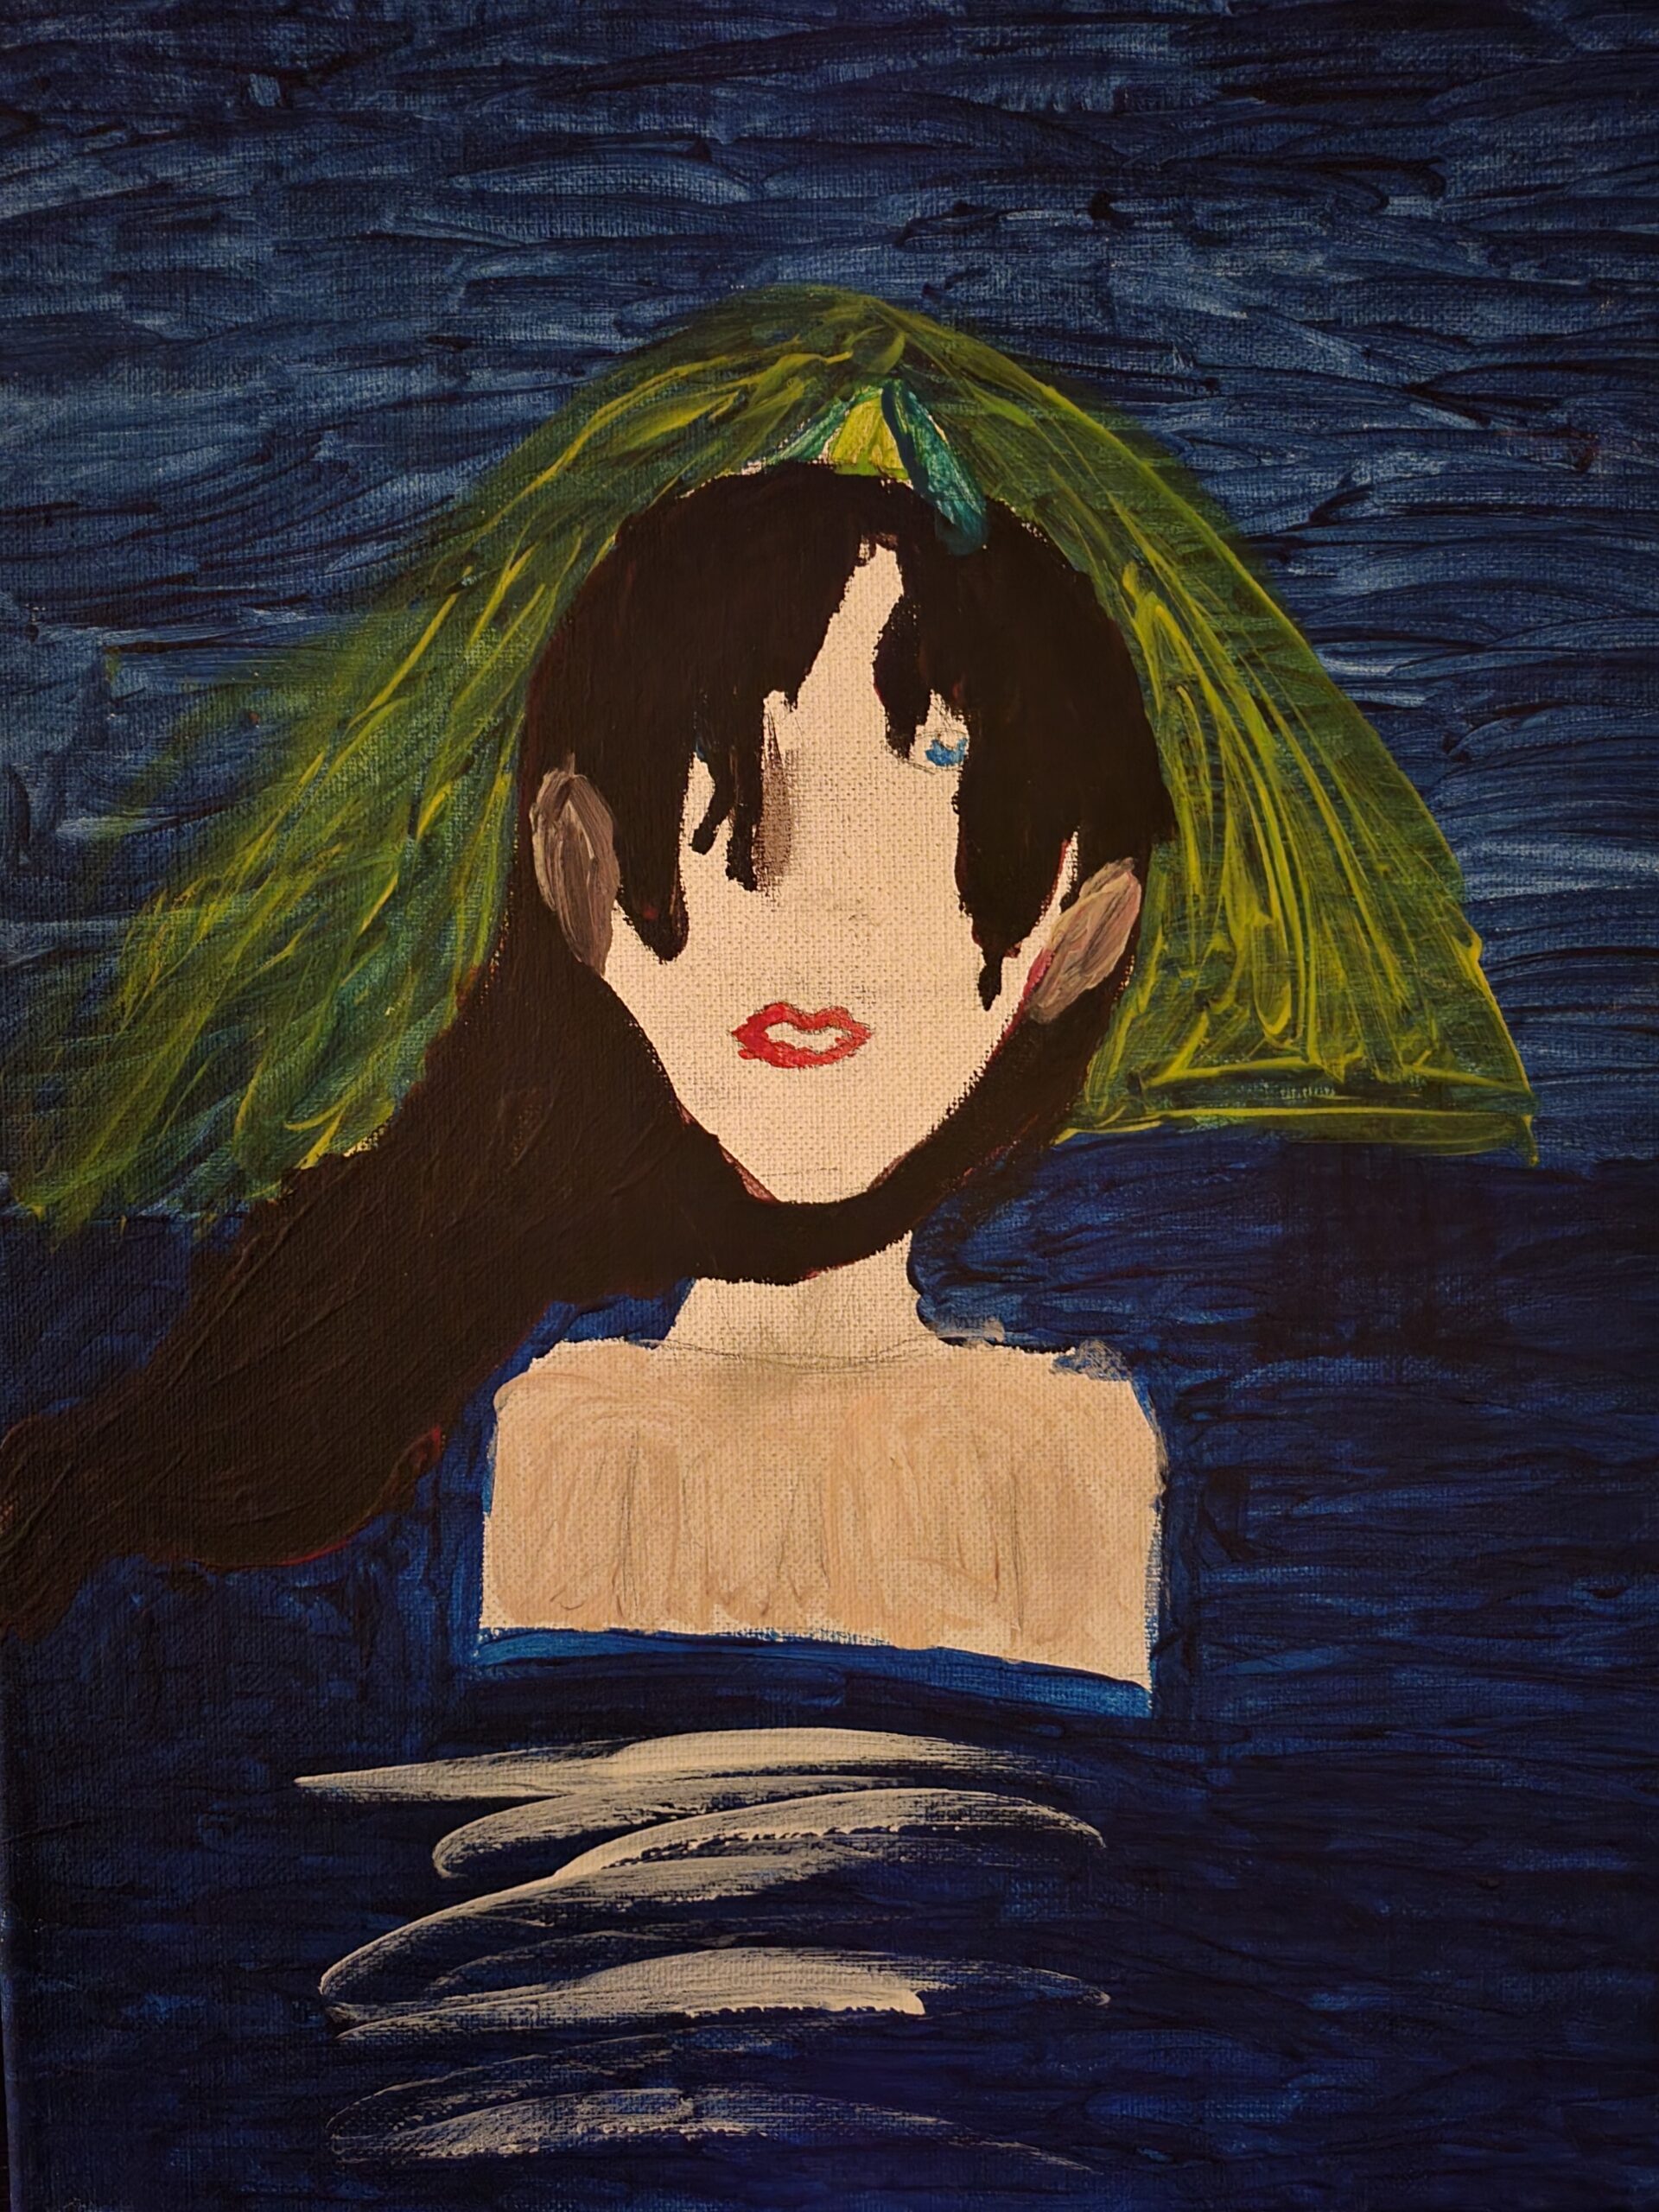 Painting of a young woman in the water